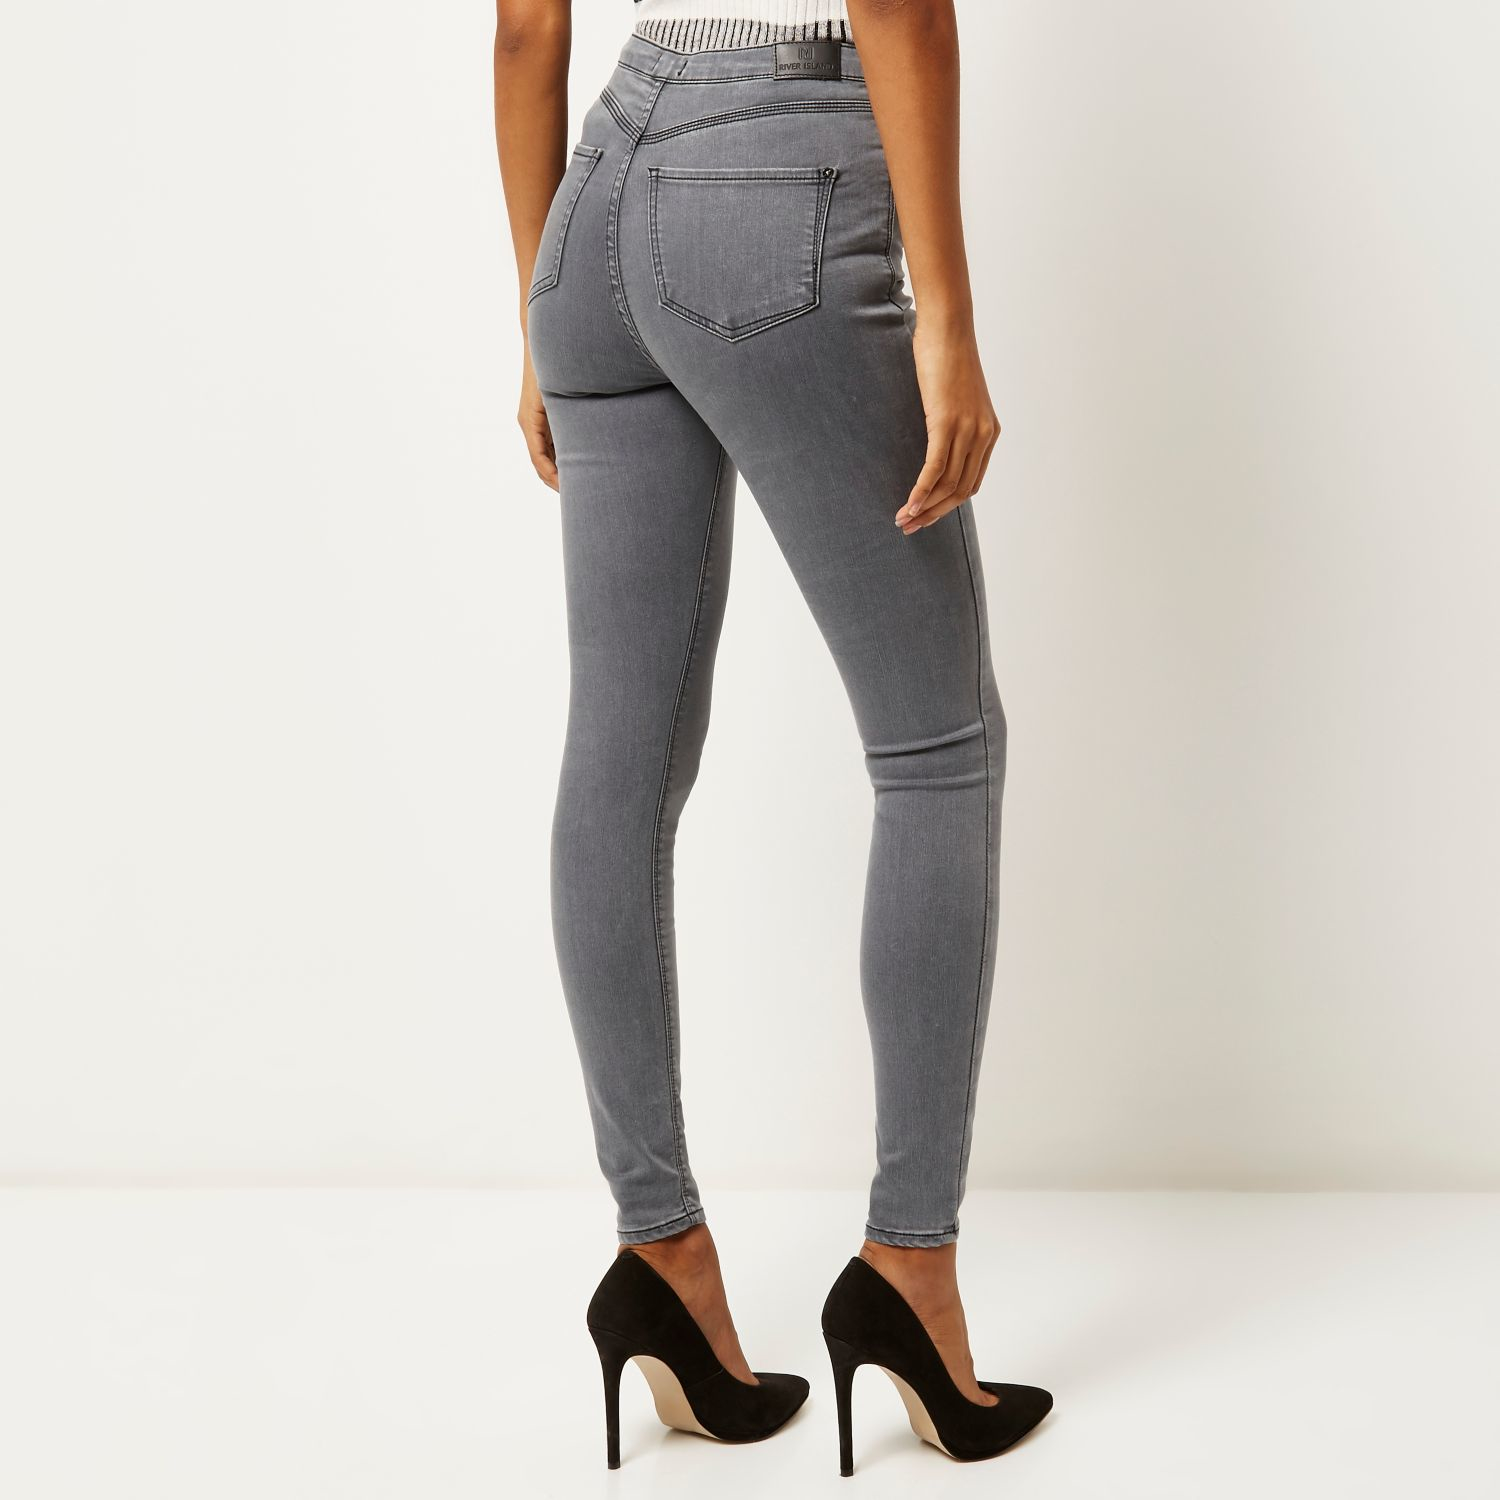 river island molly high waisted jeans